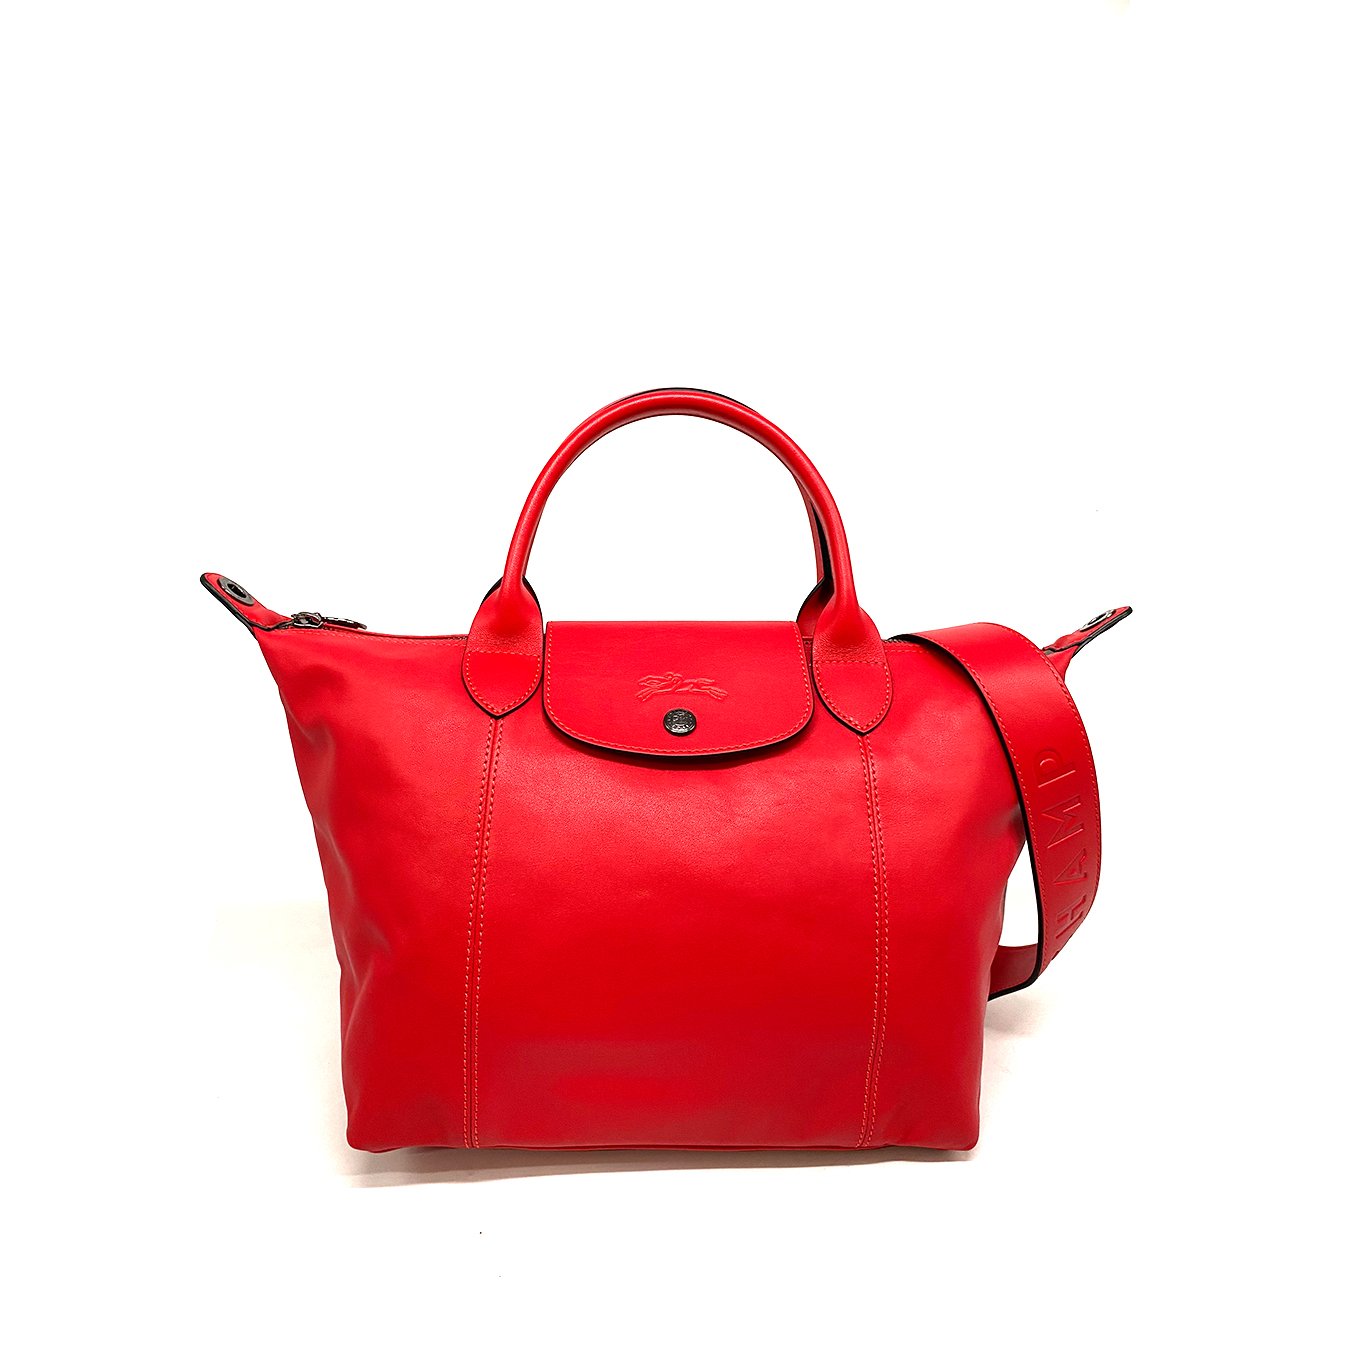 Longchampe Le Pliage Cuir Small Red